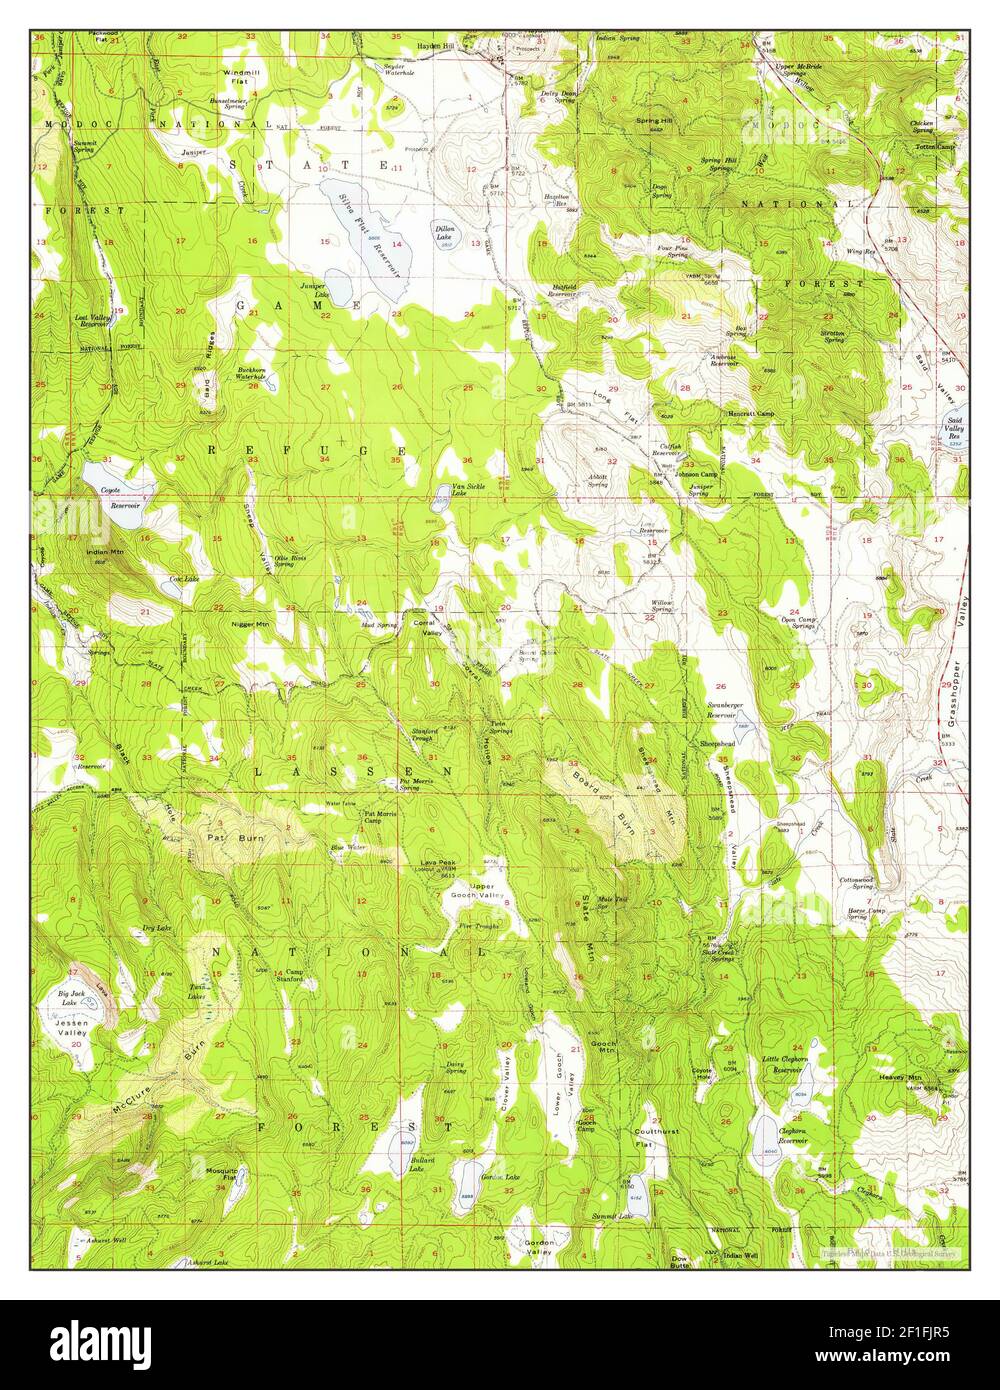 Hayden Hill, California, map 1956, 1:62500, United States of America by Timeless Maps, data U.S. Geological Survey Stock Photo